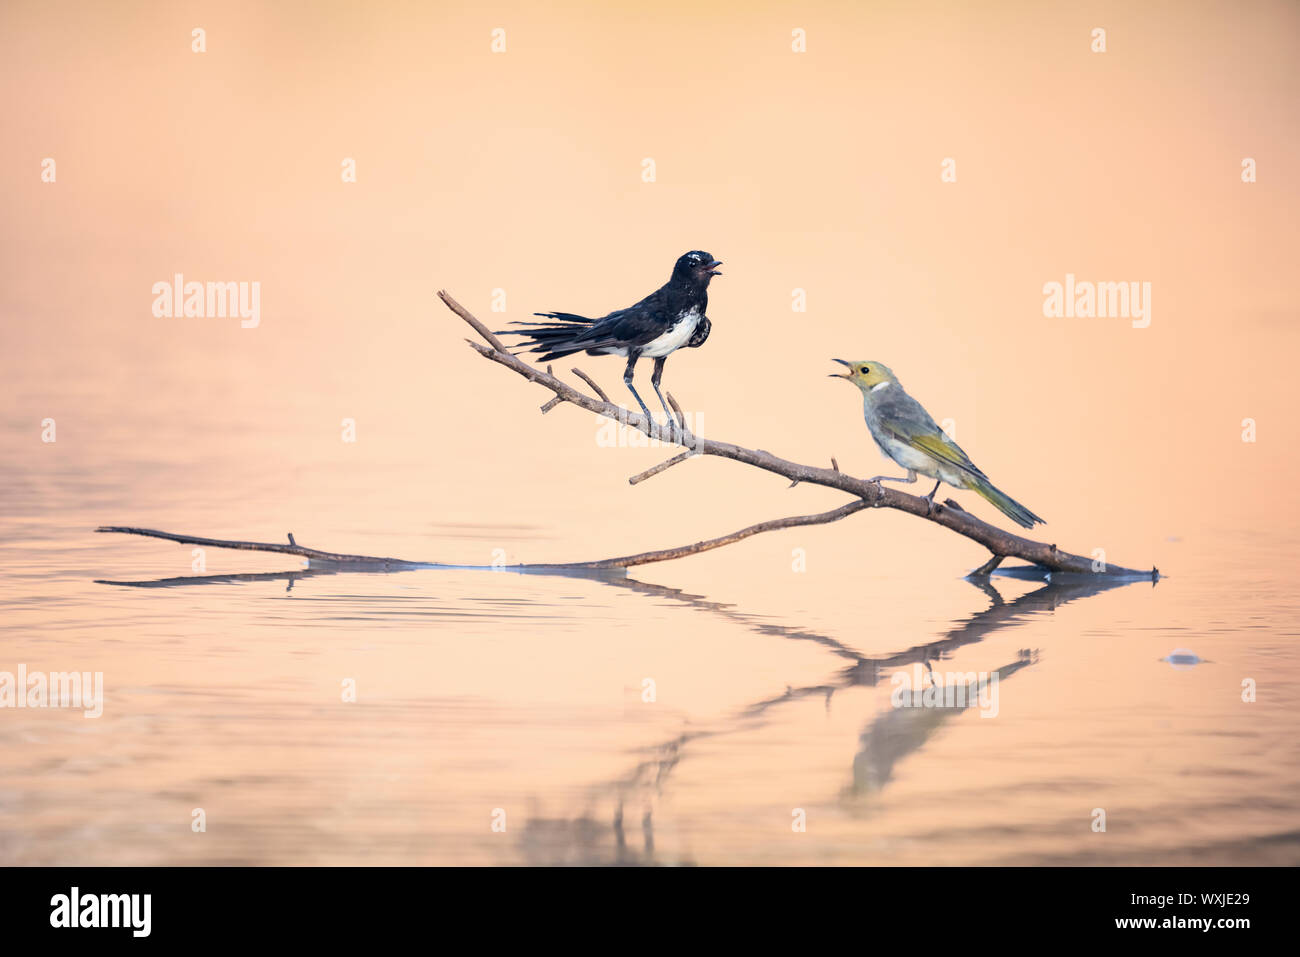 Willie wagtail (Rhipidura leucophrys) and white plumed honeyeater (Lichenostomus penicillatus) on a branch in a lake, Australia Stock Photo